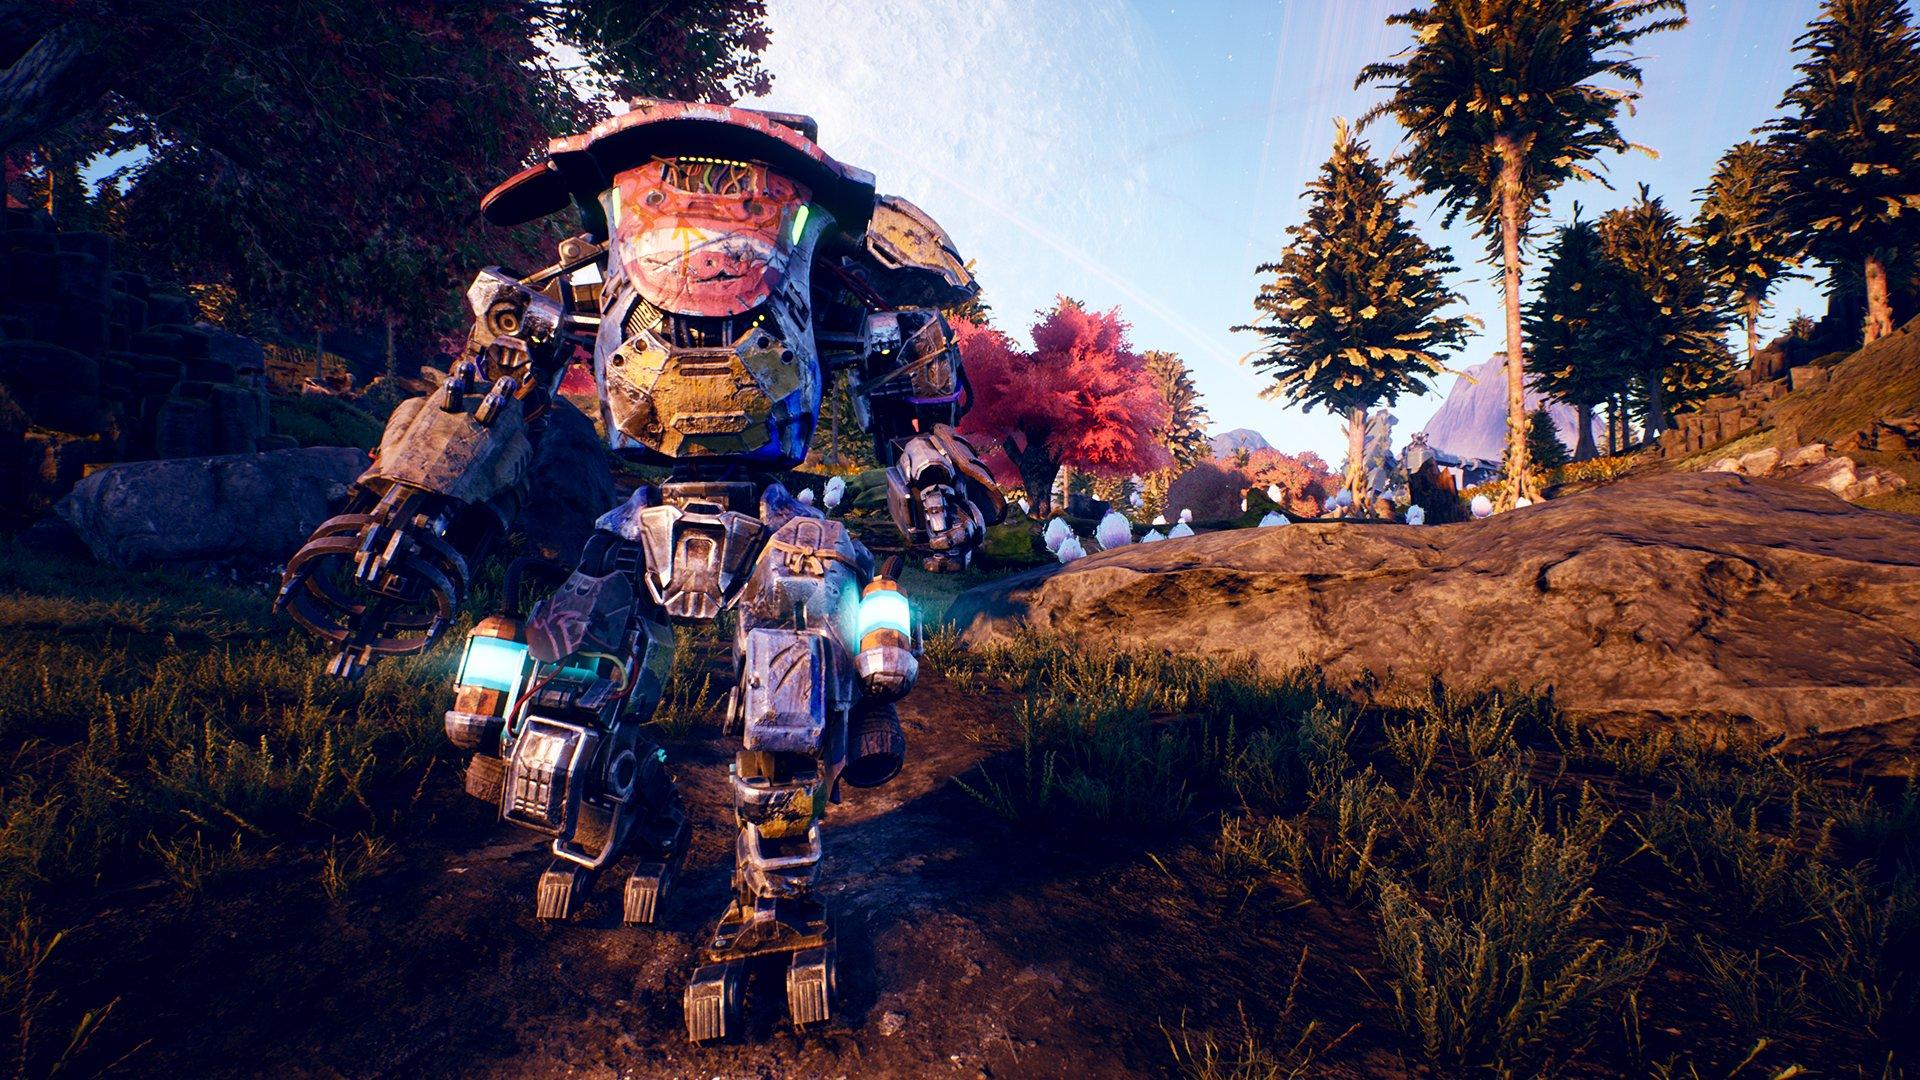 The Outer Worlds - PS4 (USADO)